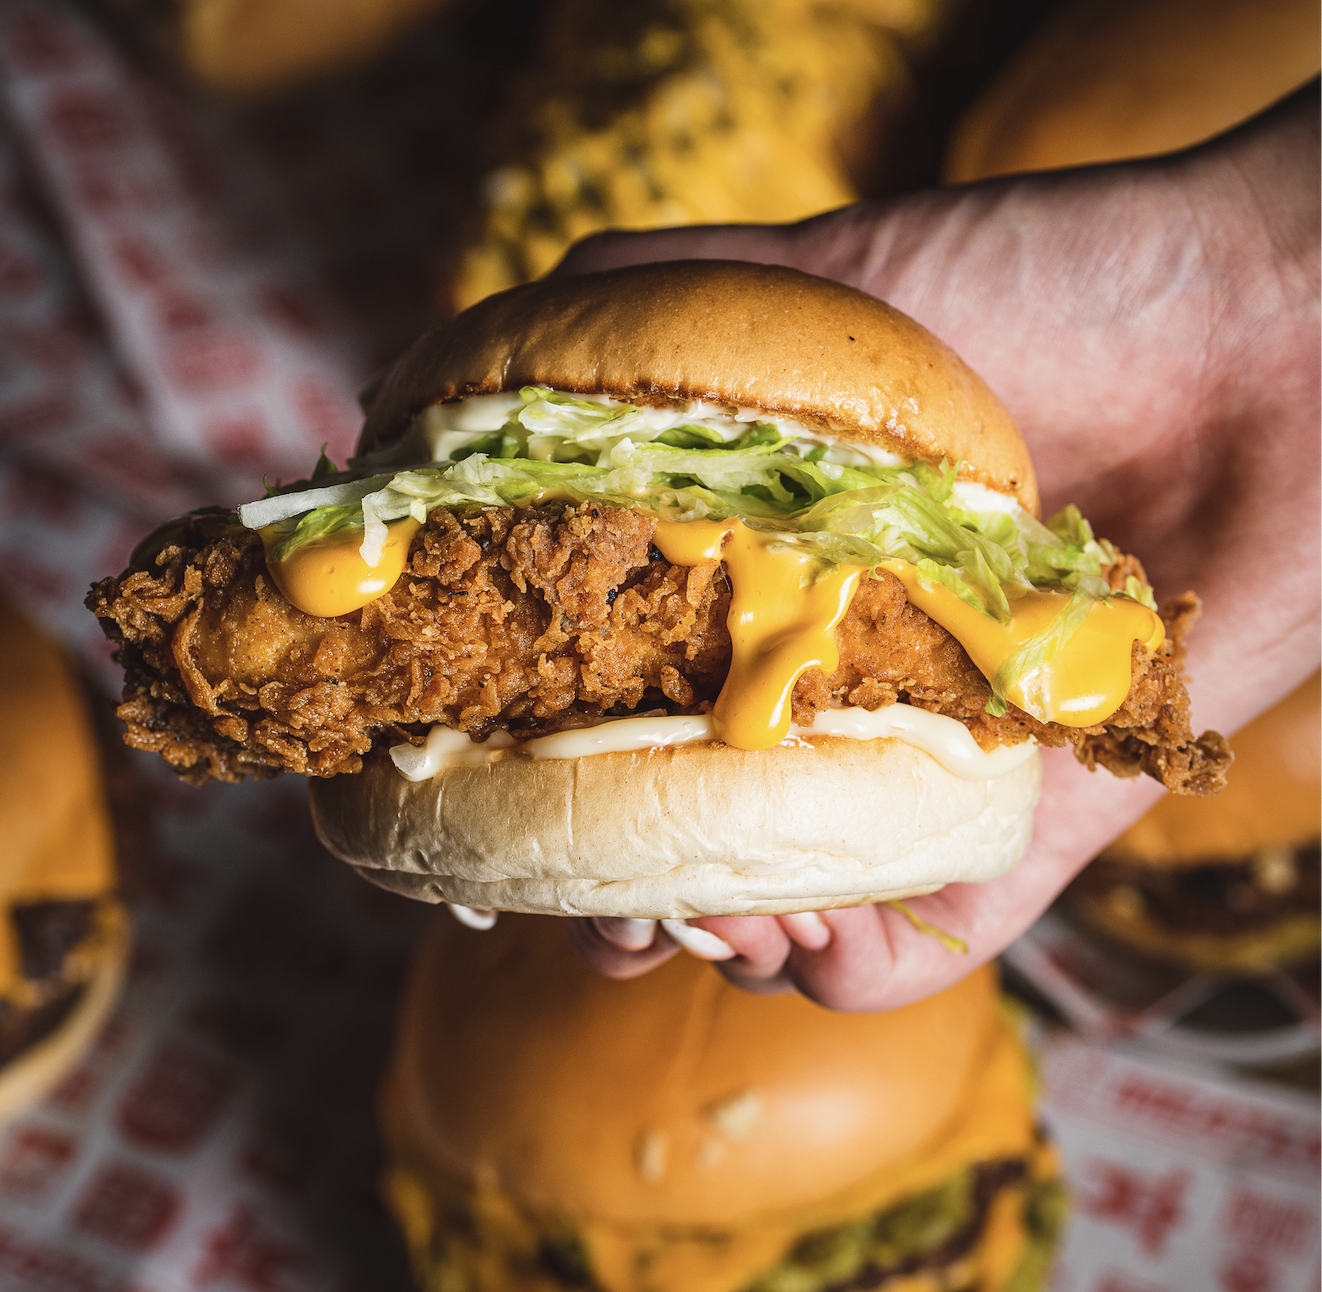 DIRTY CHICKEN CHEESE | DREDGED & FRIED CHICKEN BREAST, CHEESE SAUCE, DICED WHITE ONION, MAYO & LETTUCE Image